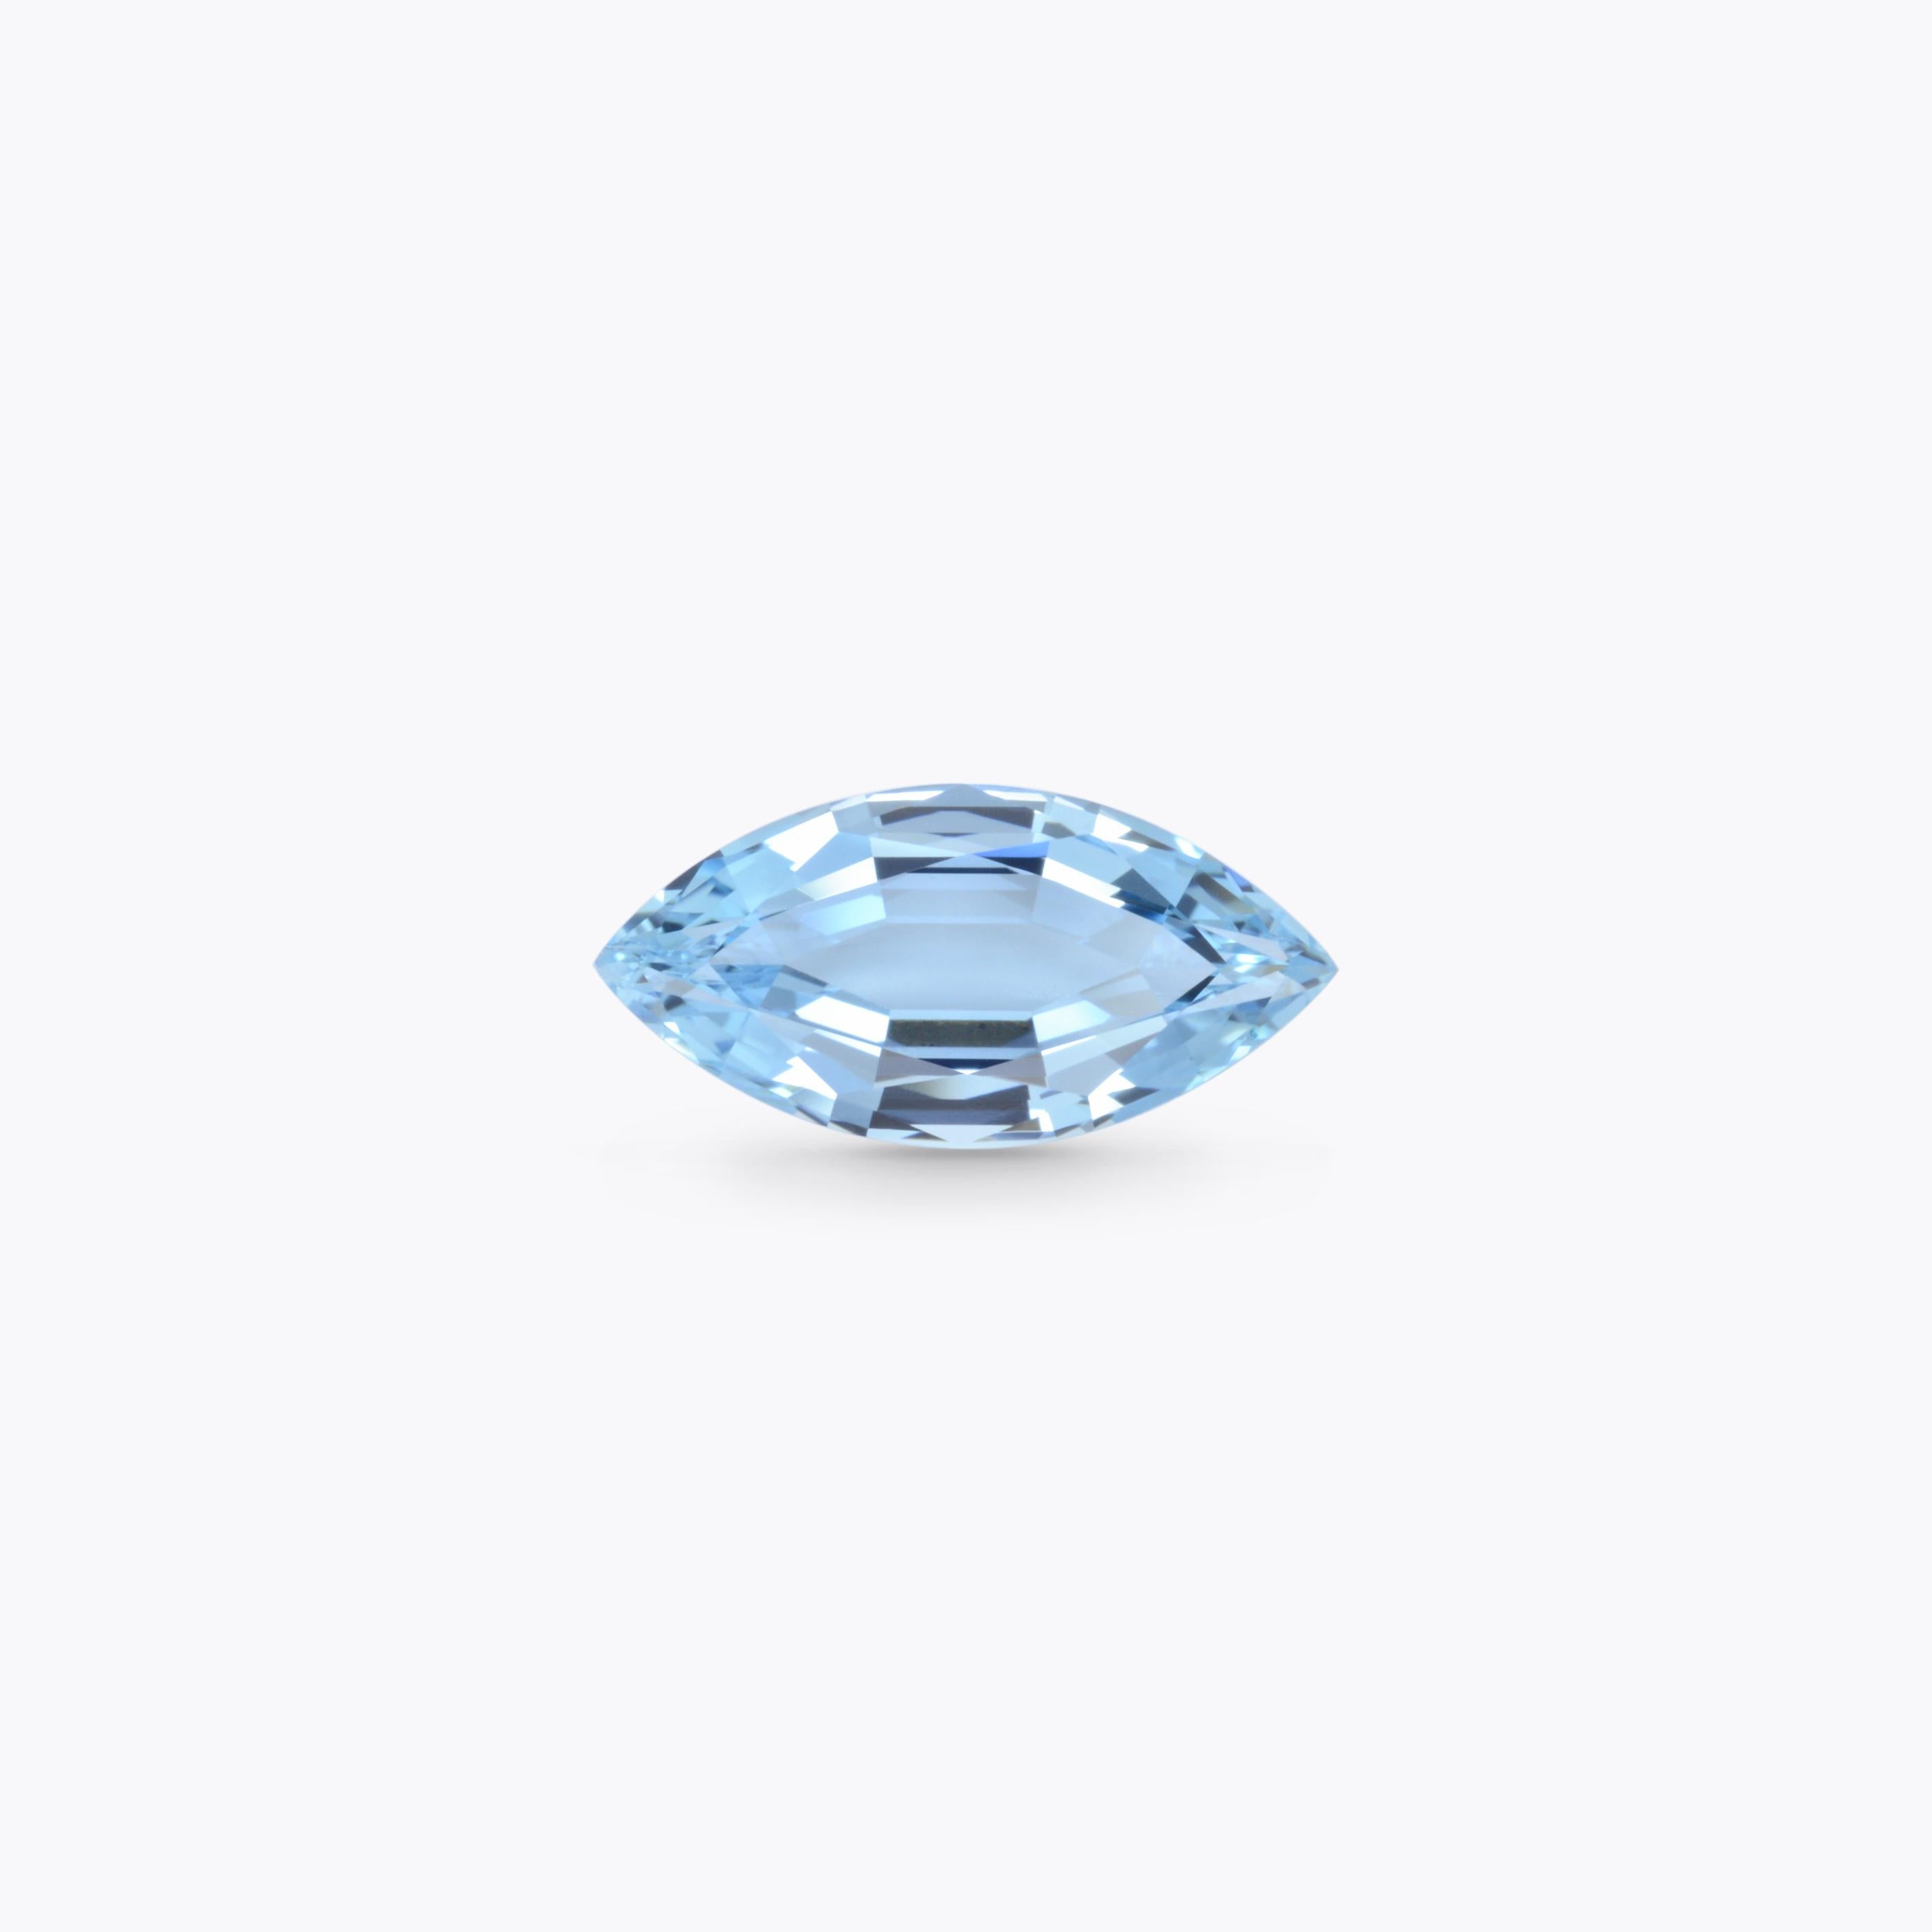 Splendid 5.52 carat Aquamarine Marquise gem, offered loose to a fine gemstone lover.
Dimensions: 19.10 x 9.40 x 5.30 mm
Returns are accepted and paid by us within 7 days of delivery.
We offer supreme custom jewelry work upon request. Please contact